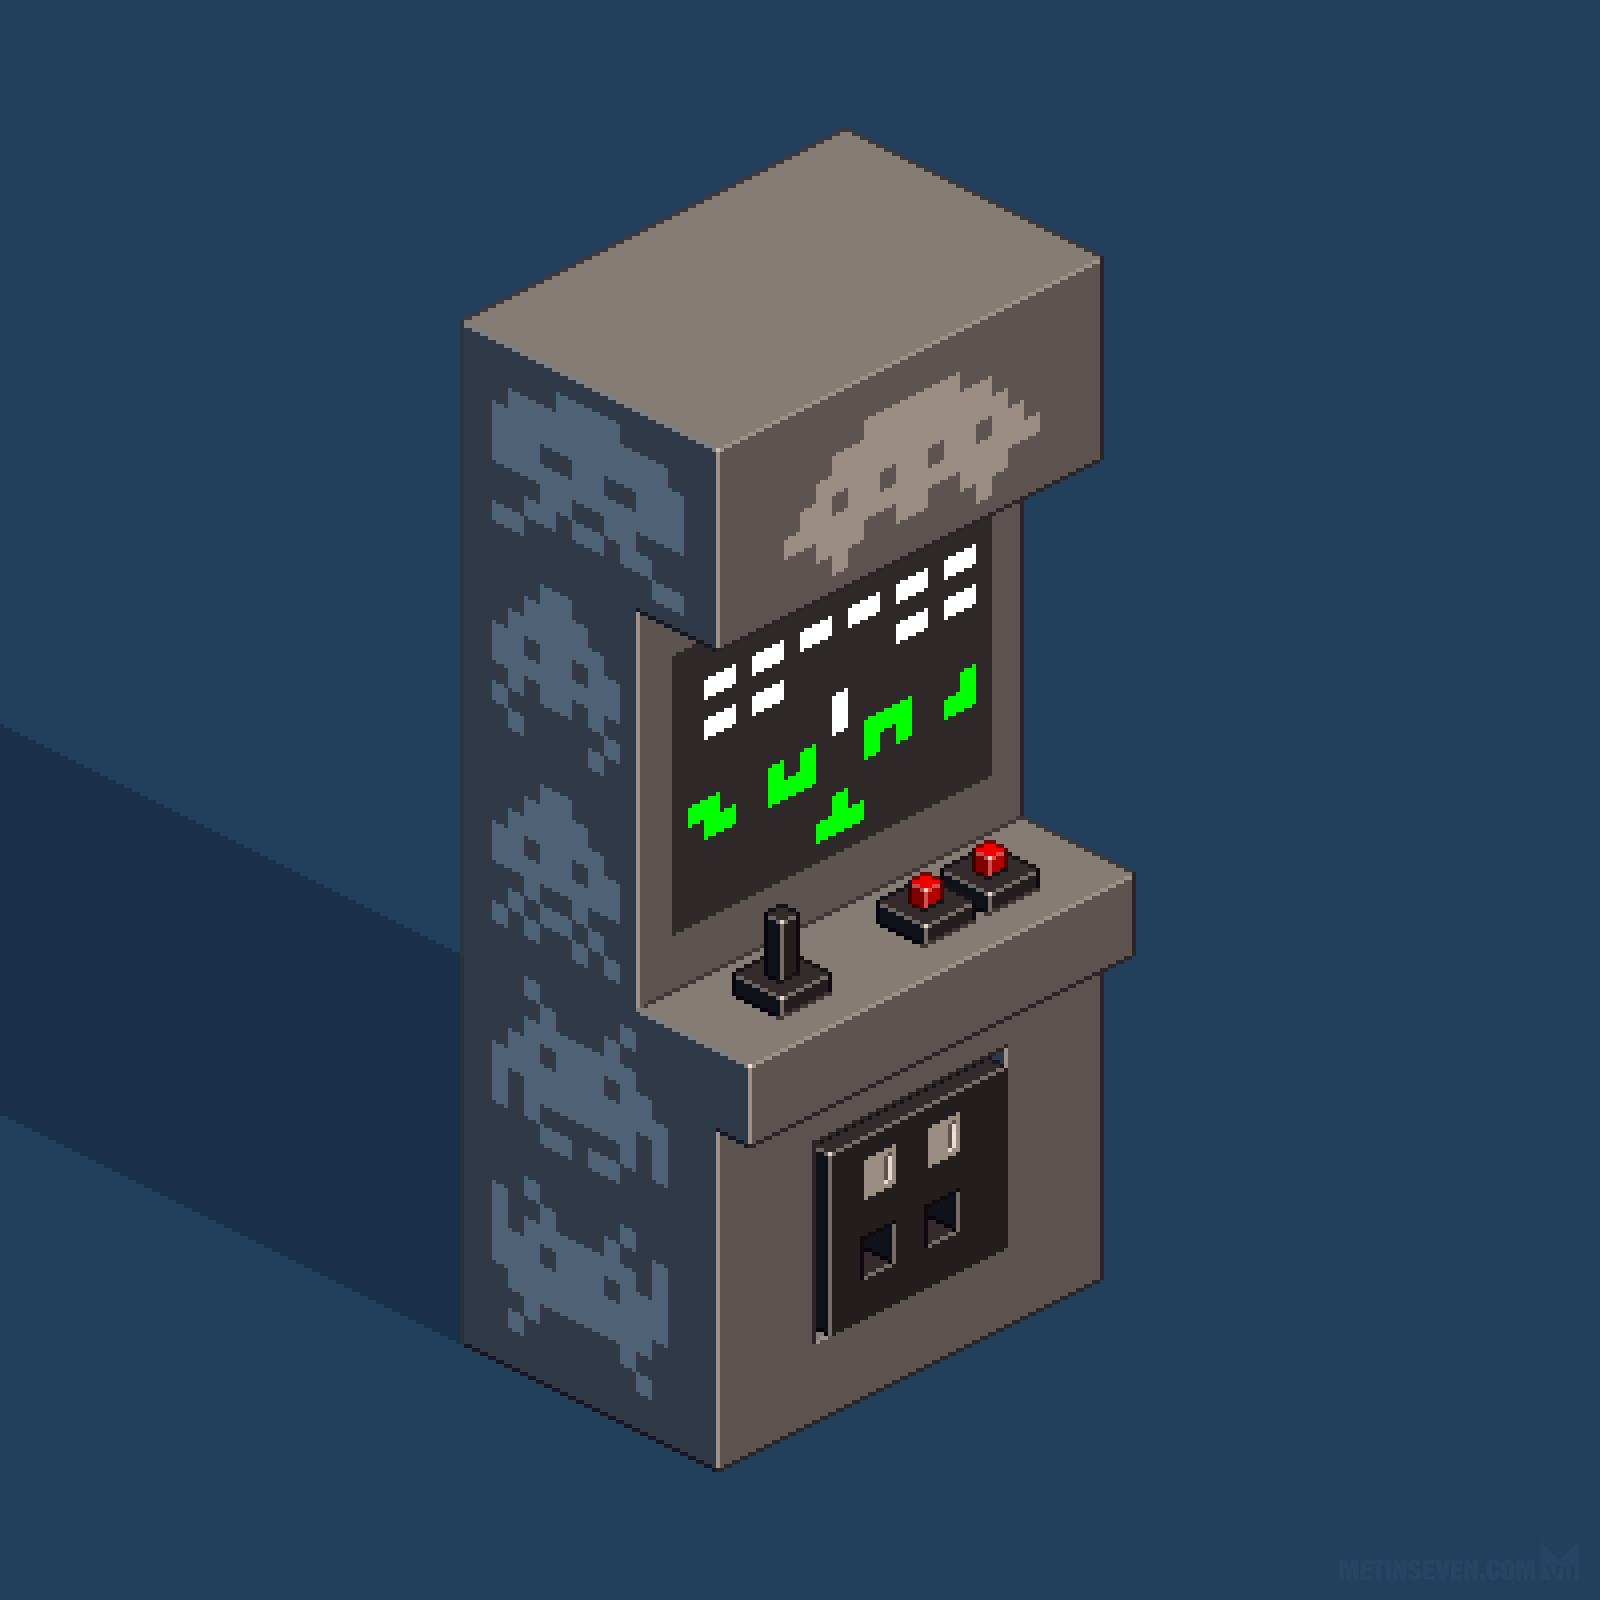 Space invaders arcade cabinet